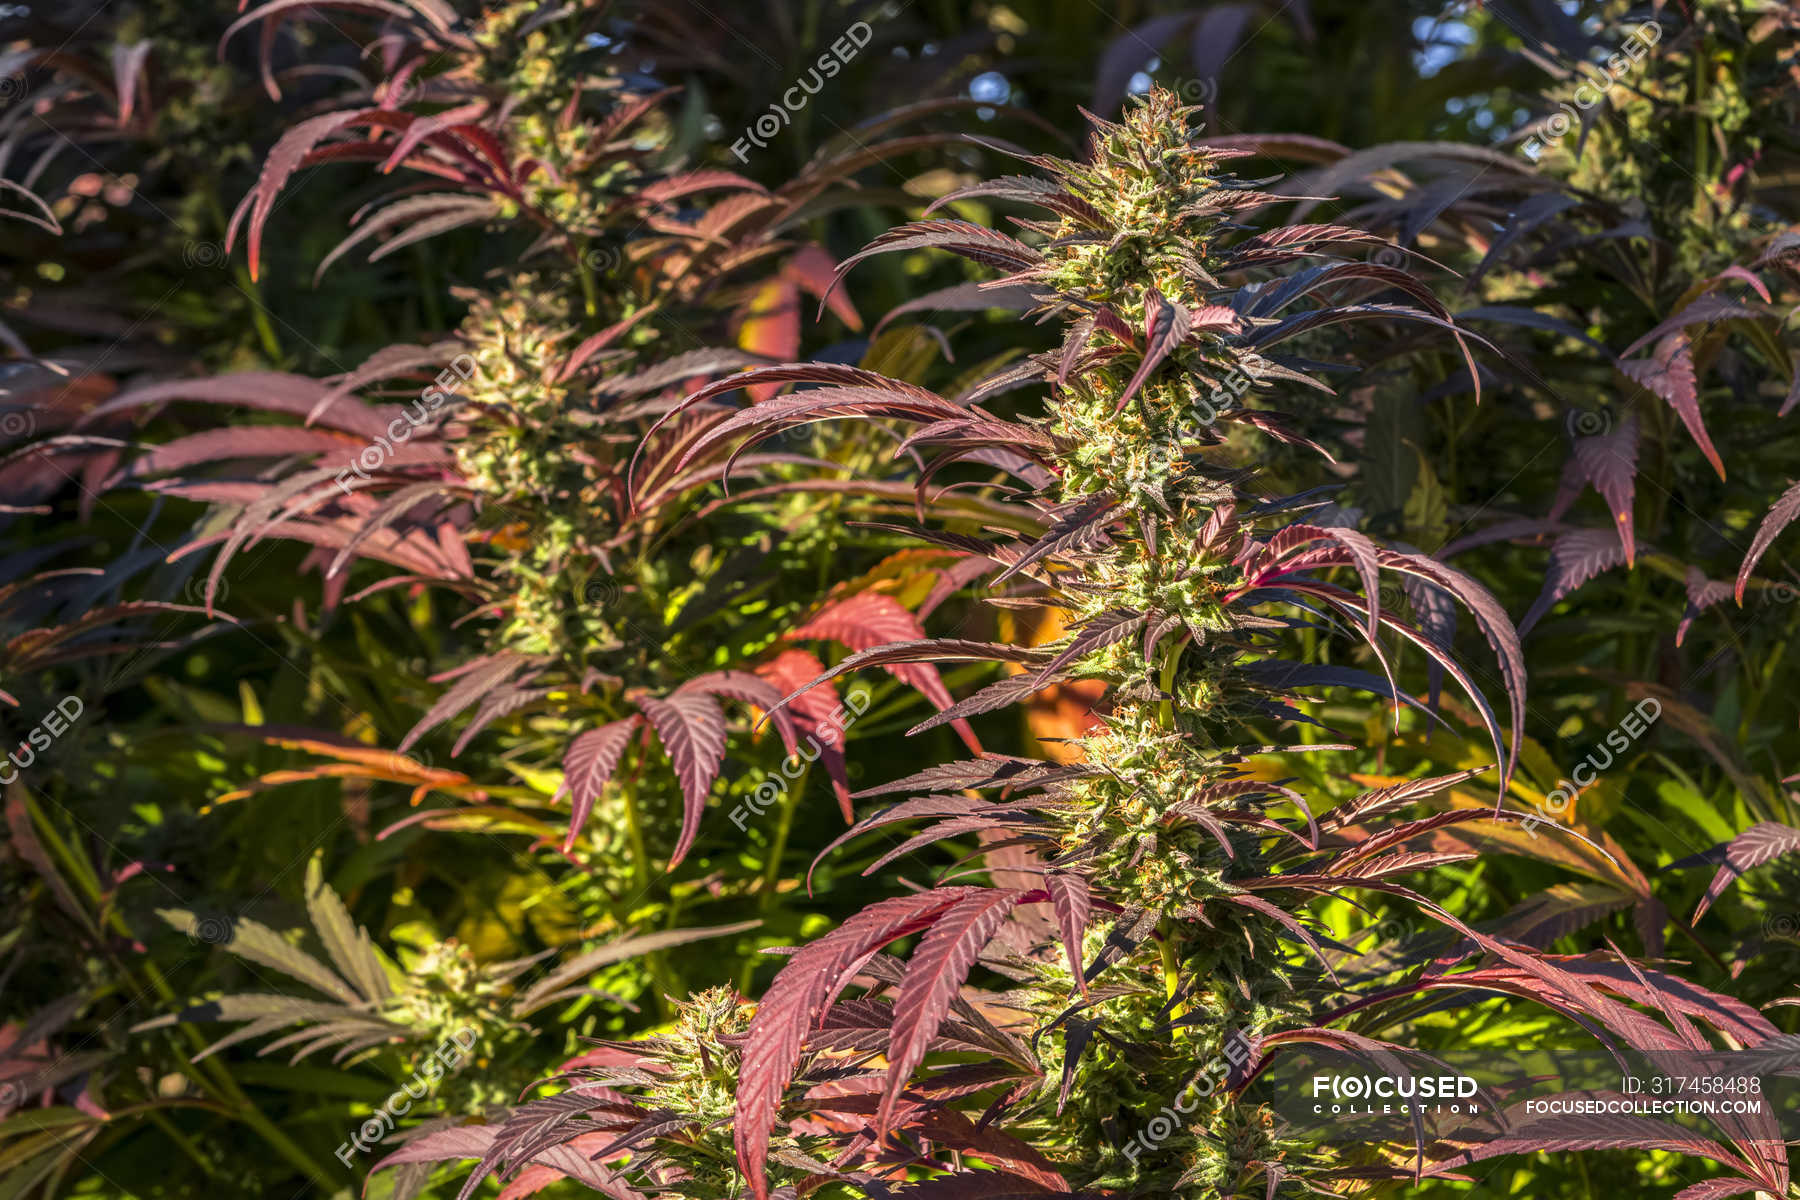 Flowering time for Panama Red pot feminized seed